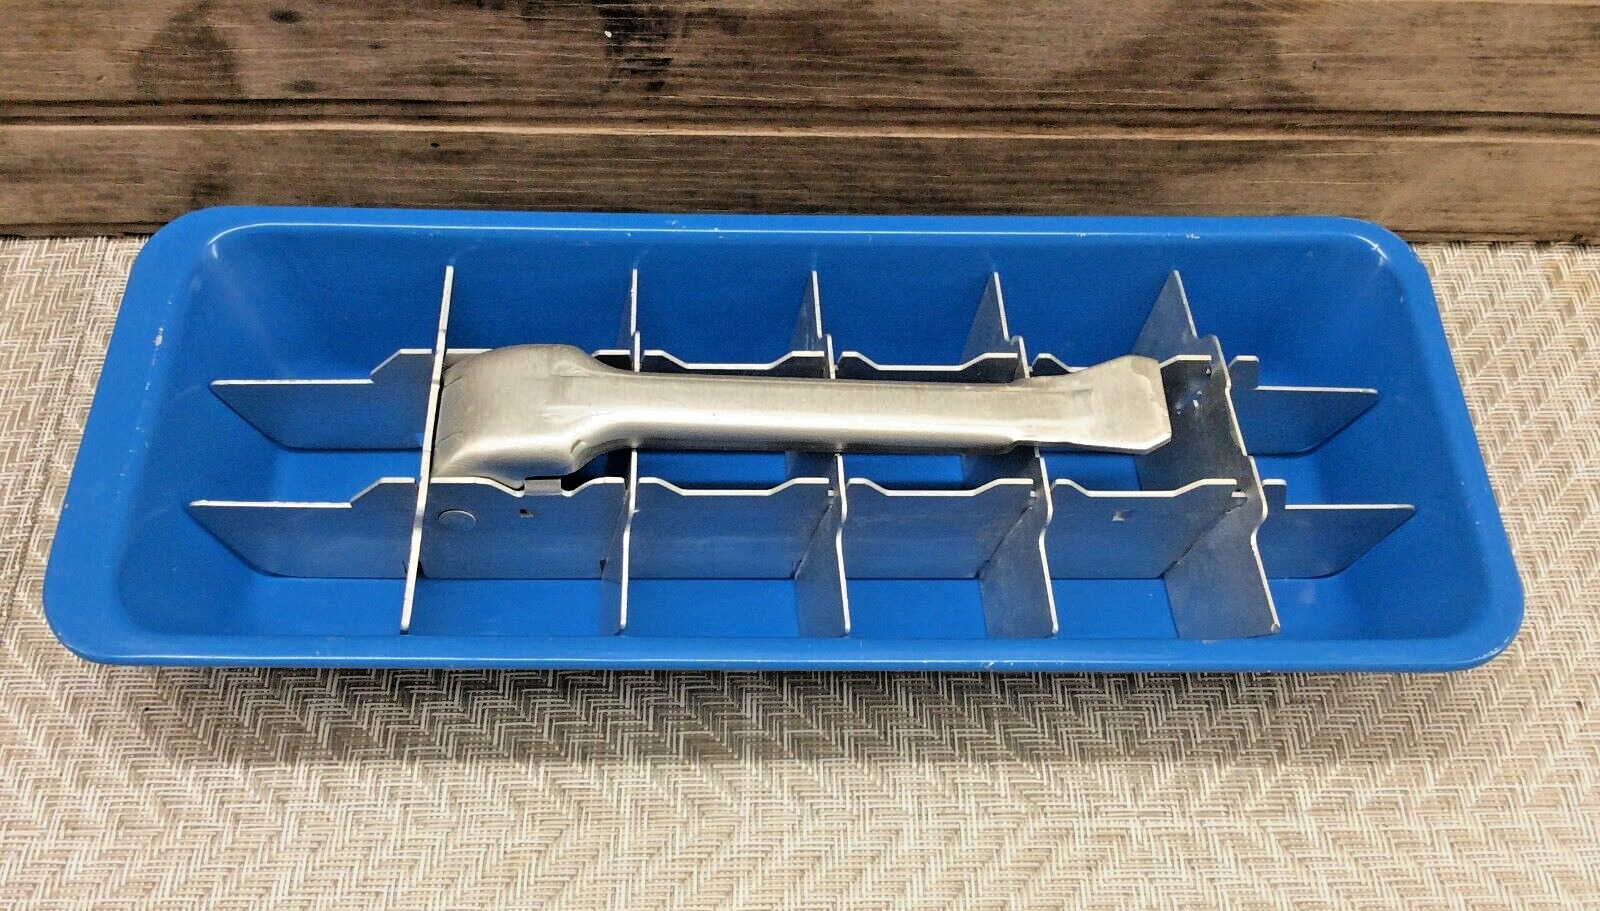 Vintage Blue Aluminum Ice Tray With Lift-Up Handle Makes 18 Cubes RARE